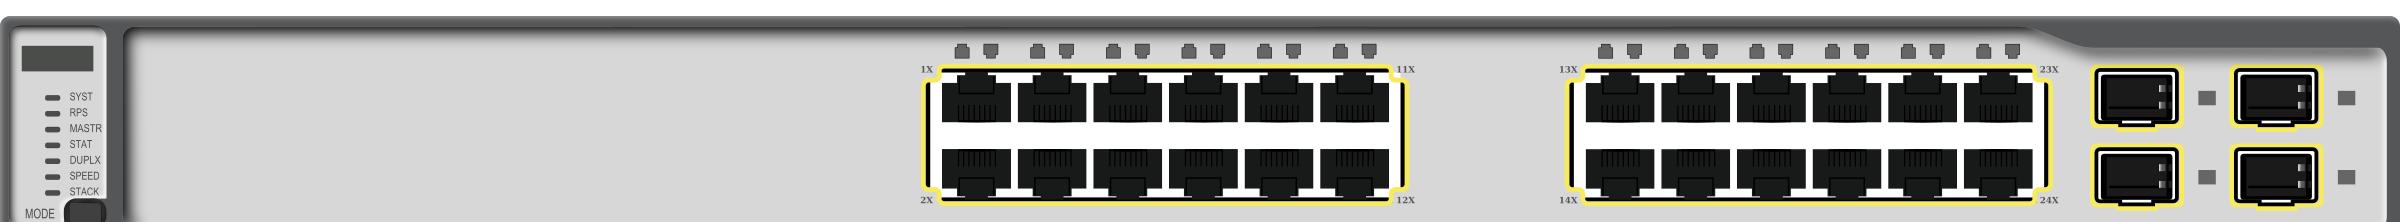 Gigabit Layer 3 Switch #1 png